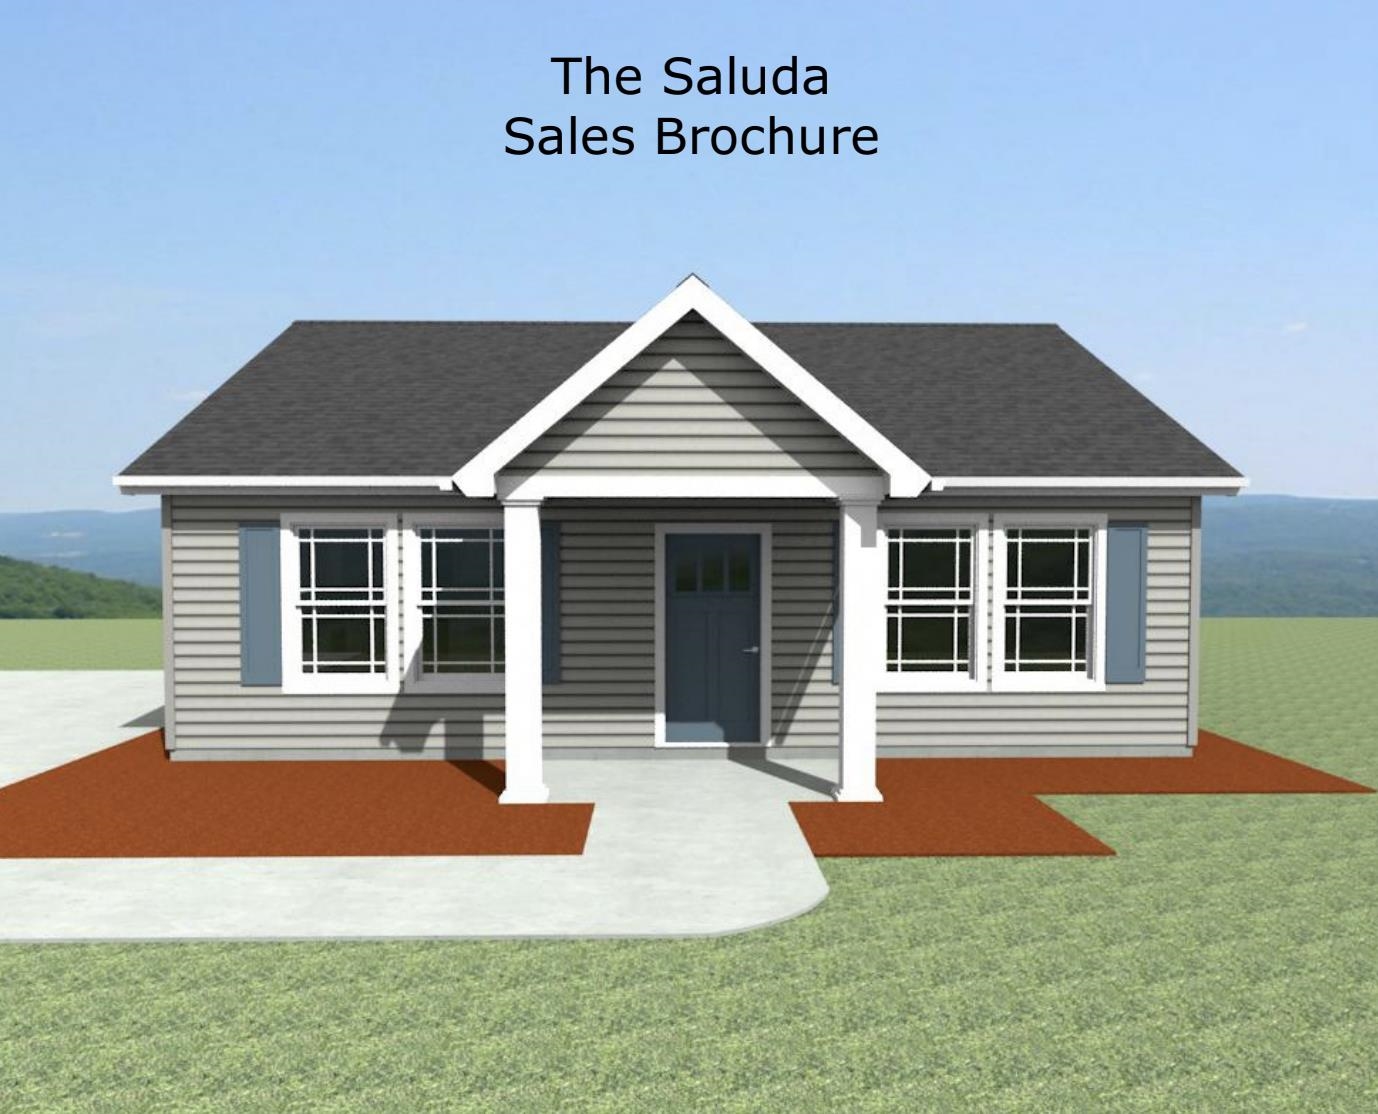 The Saluda plan features 2 bedrooms and 2 bathrooms. The spacious living area is open into the kitchen/dining area. The master bedroom features a tray ceiling and full bathroom. 30-year architectural shingles, site-built construction, and a "2-10" warranty are included to give you peace of mind. Lot 4. Preferred Lender/Attorney Closing Costs Incentive Offered!